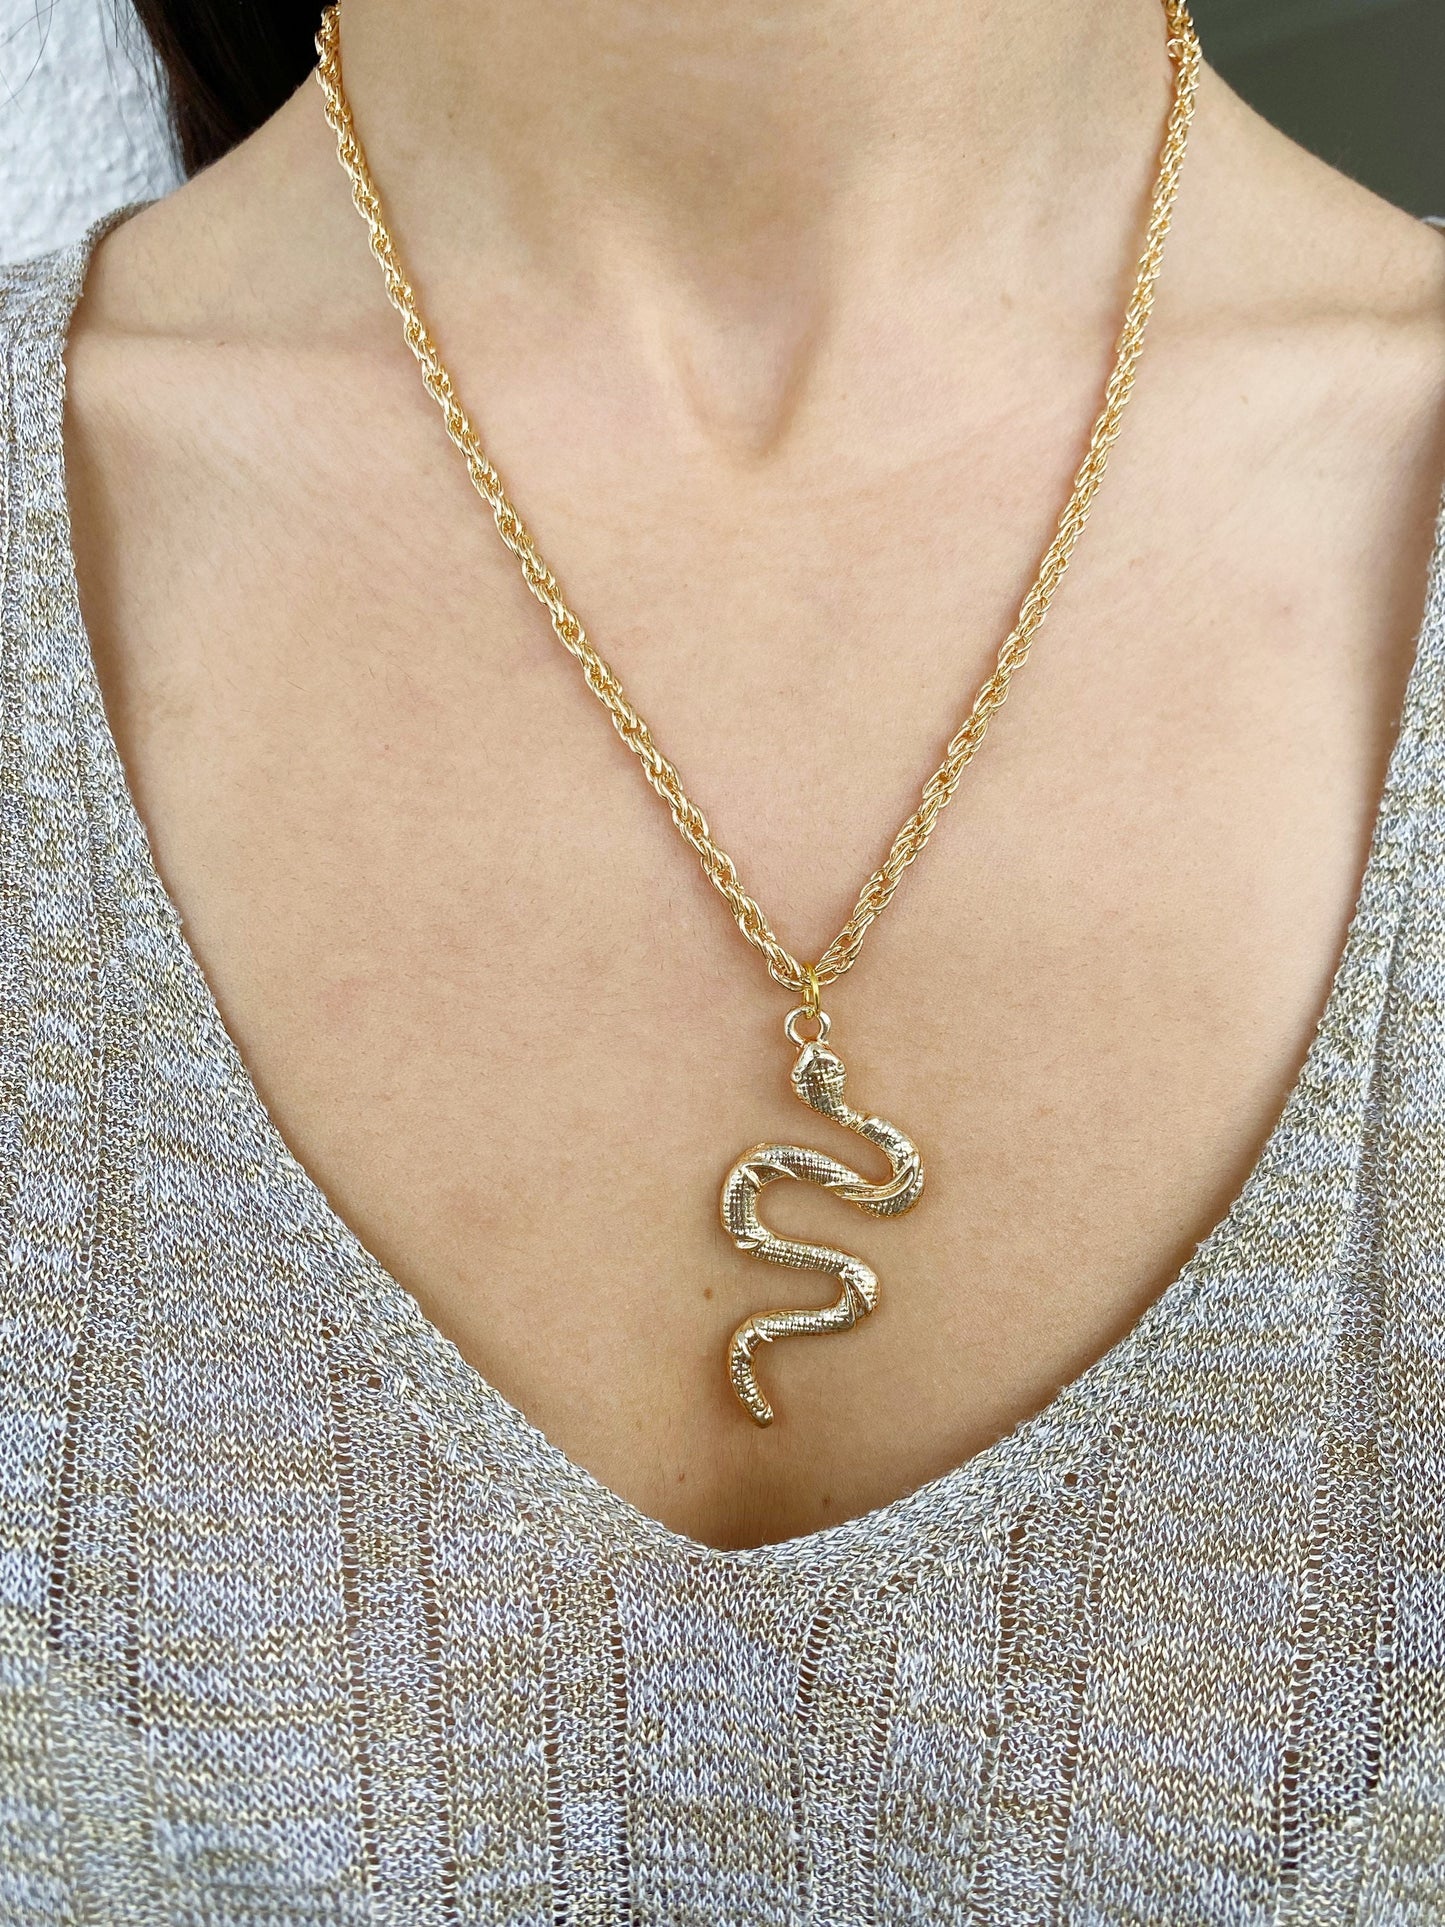 Snake Curb Rope Chain Necklace •  Unisex Dangling Twisted Chain